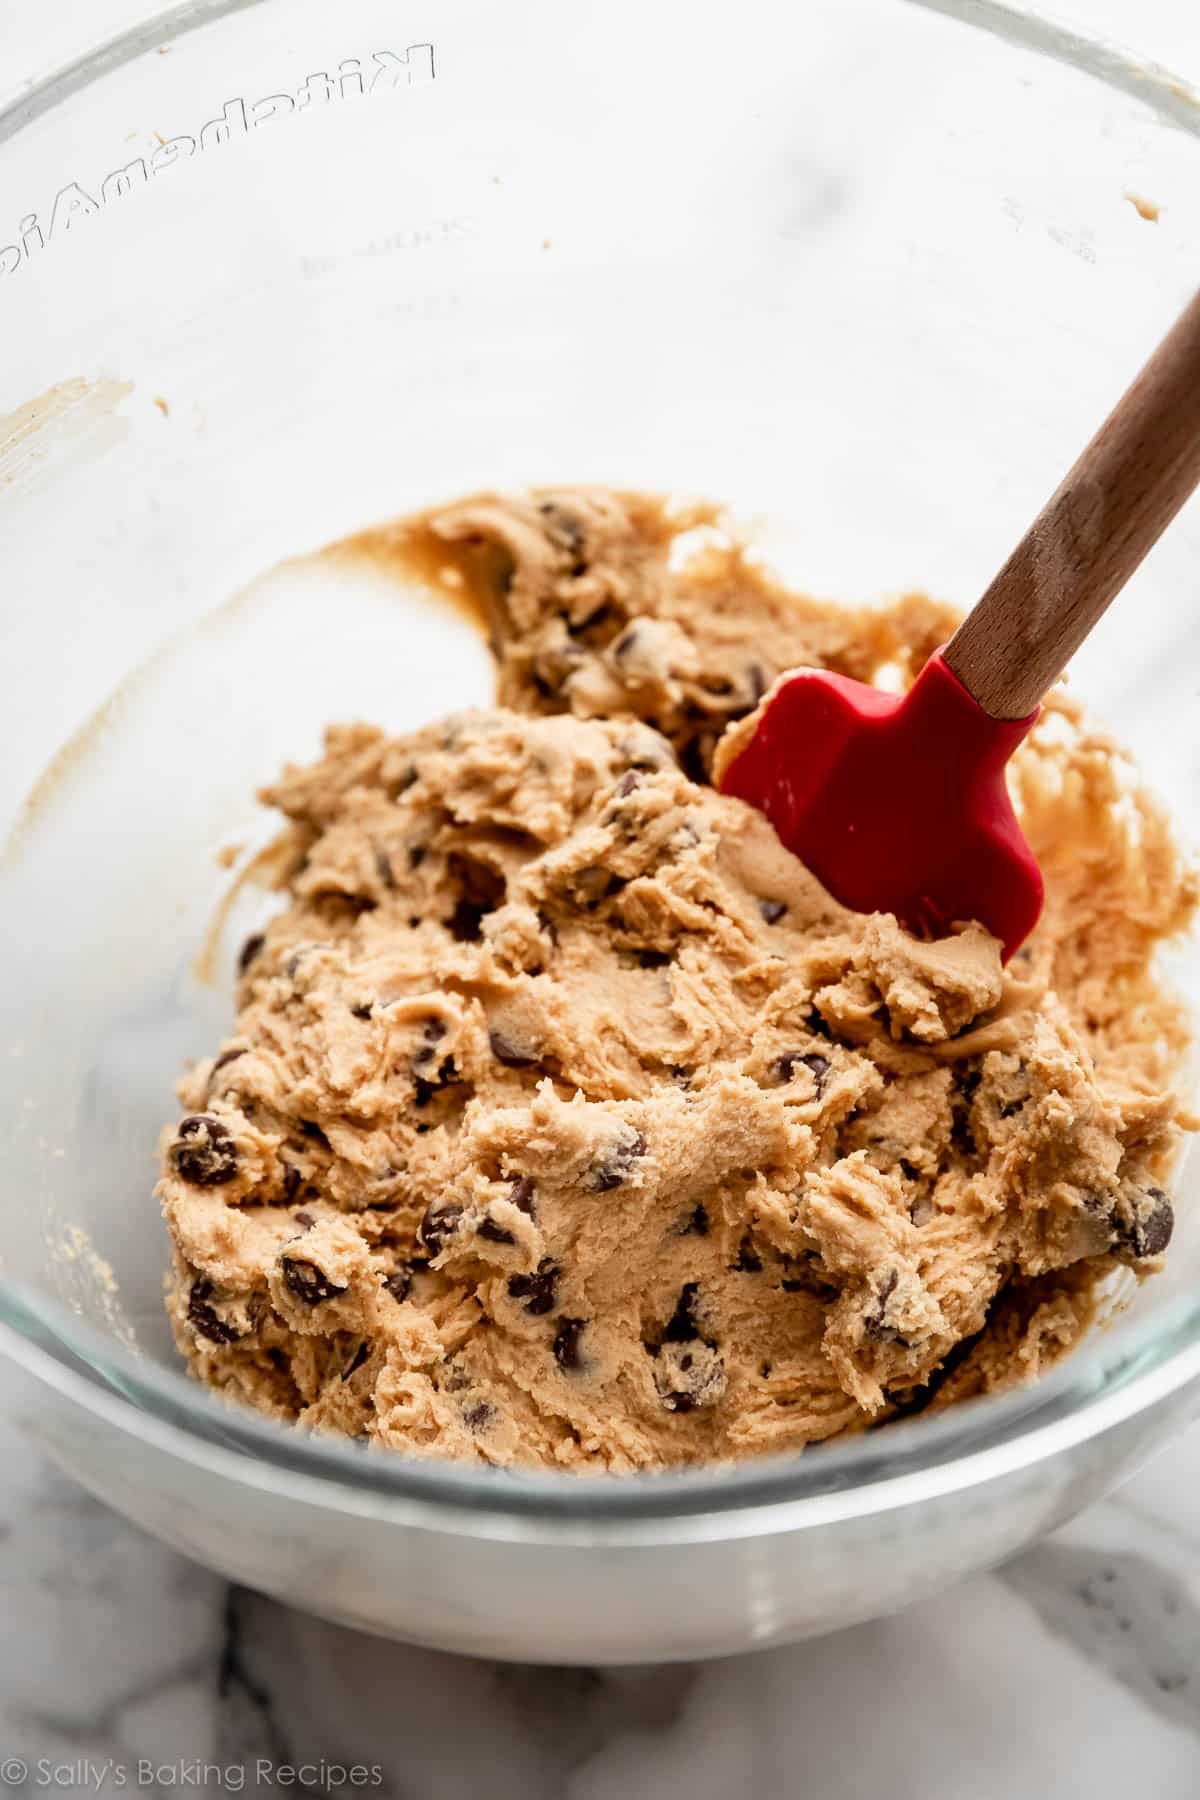 peanut butter chocolate chip cookie dough with red spatula in glass mixing bowl.